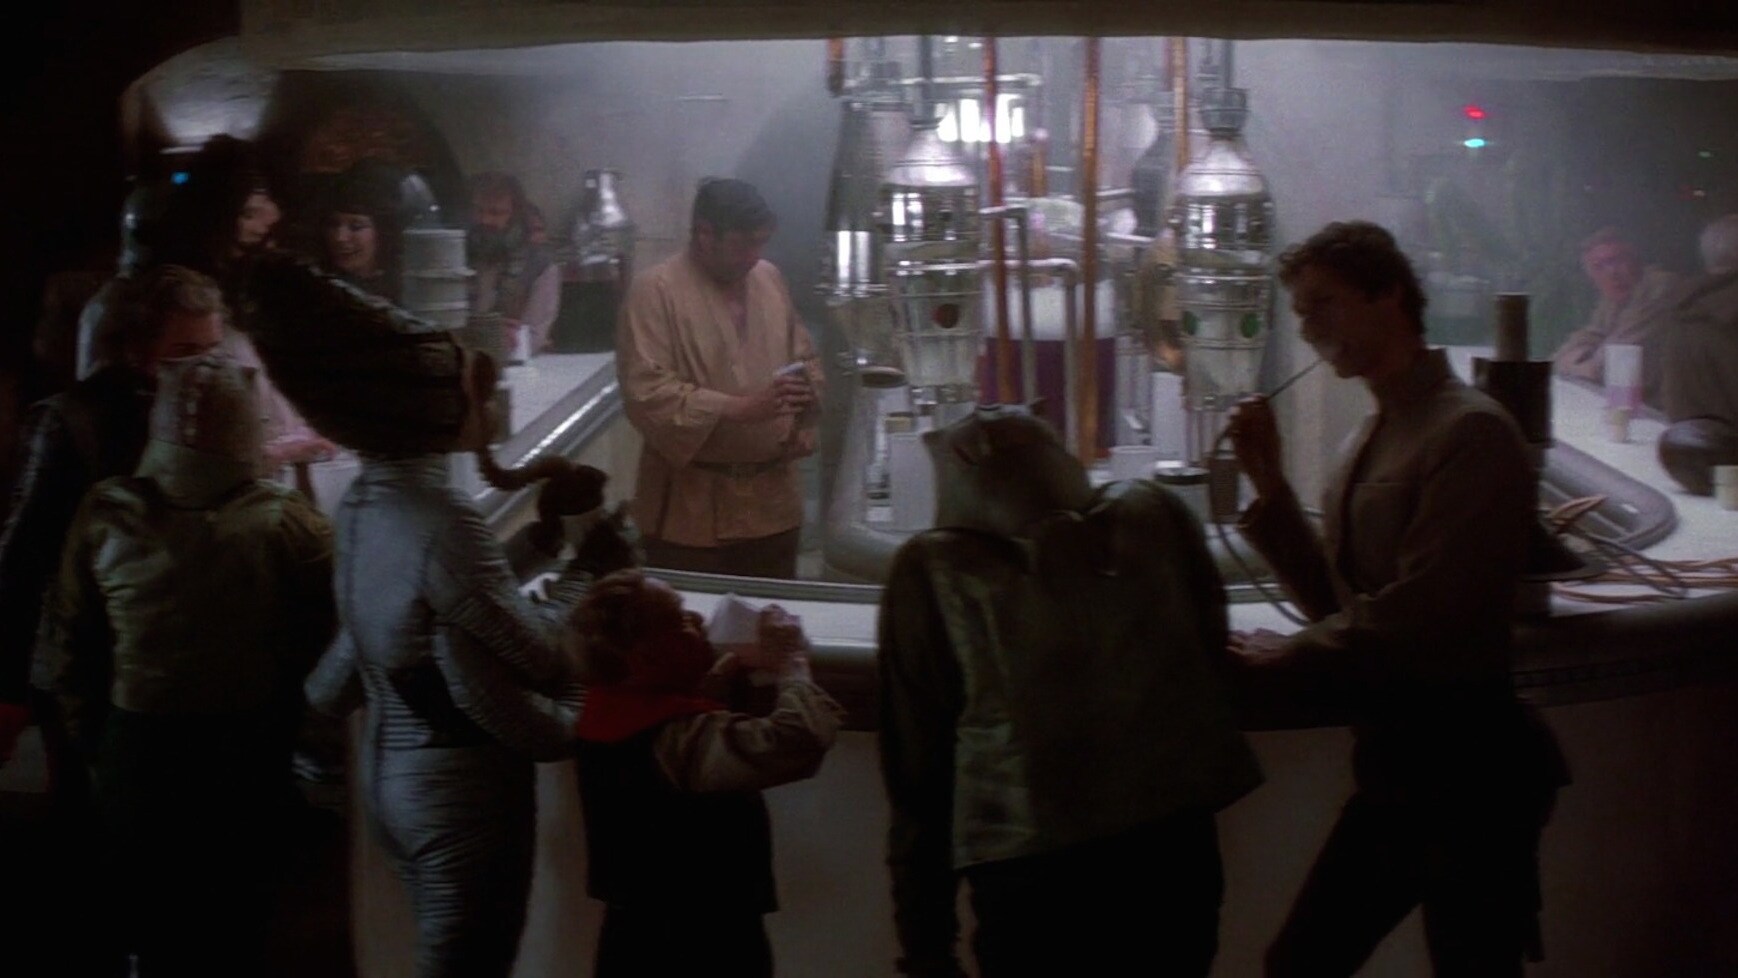 My Favorite Scene: An Old Man, a Young Man, and Two Droids Walk Into a Bar